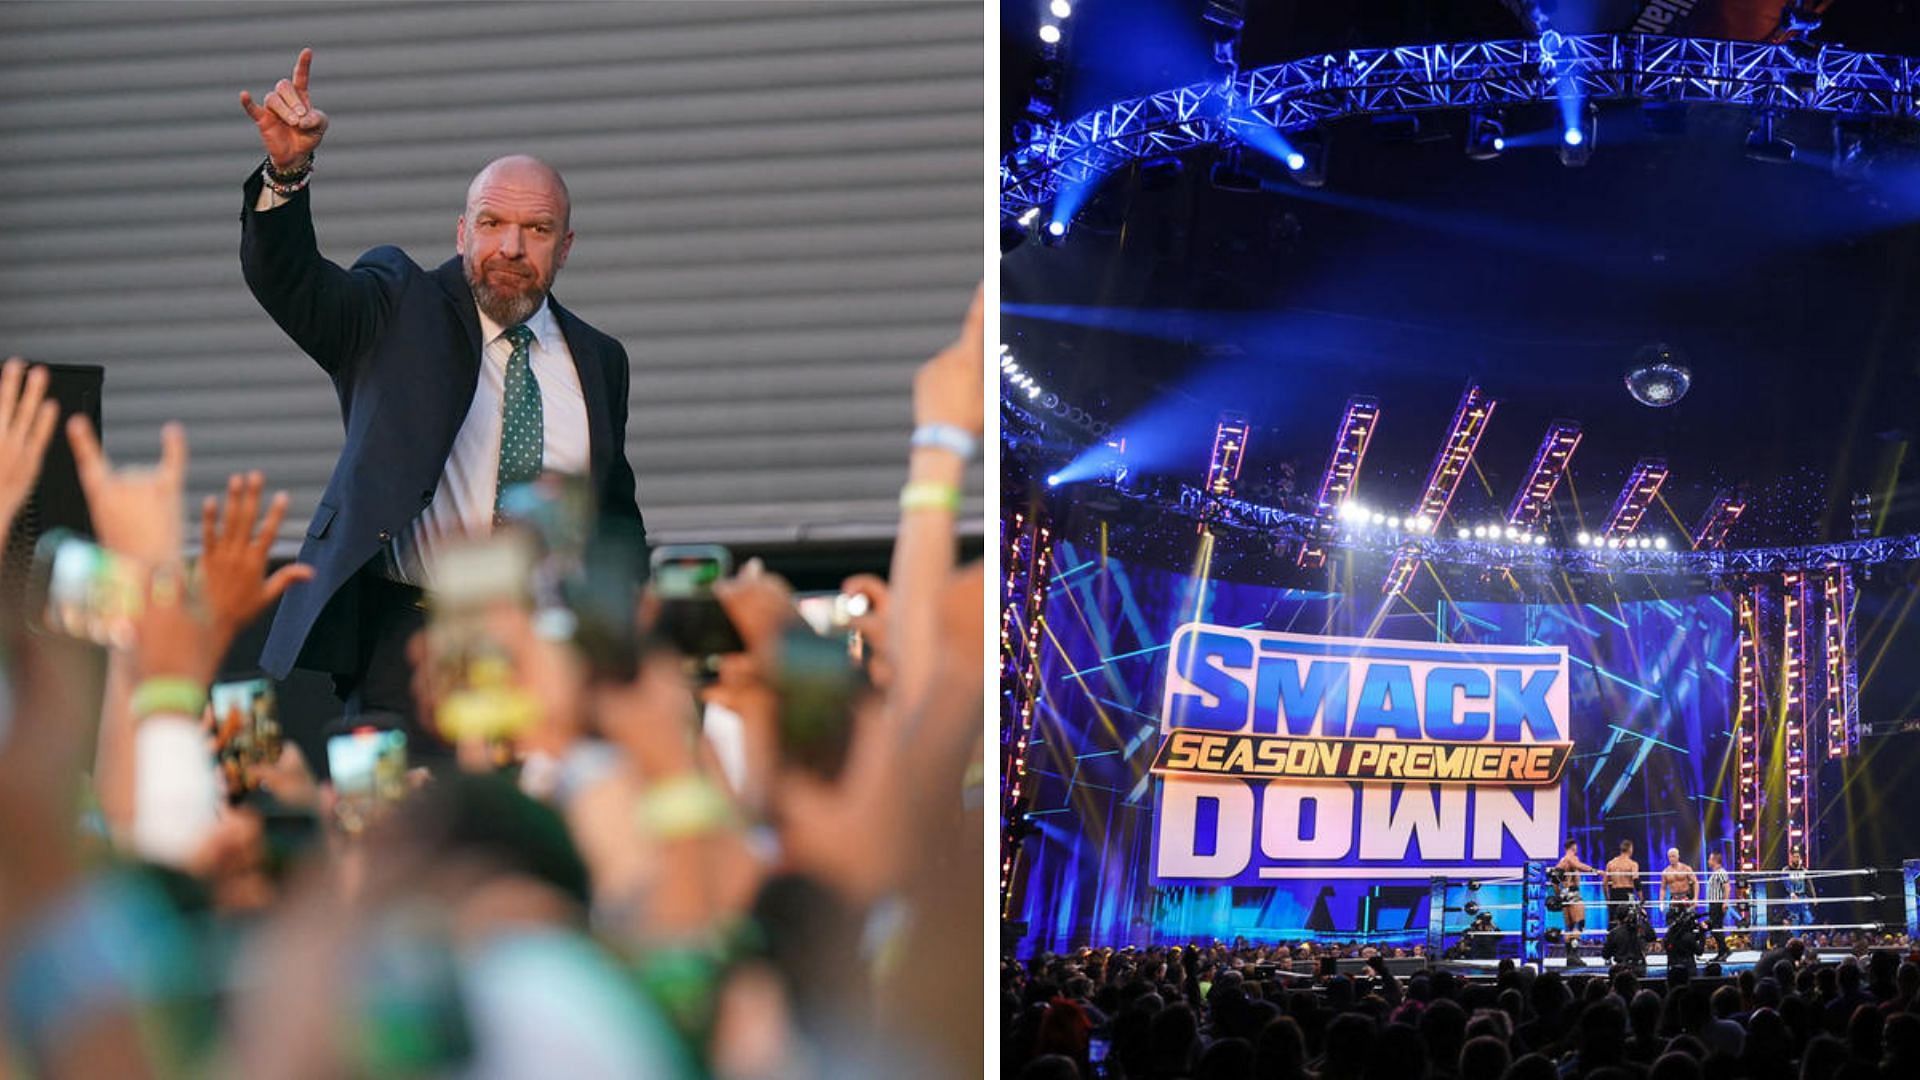 Triple H may have big plans for WWE SmackDown star